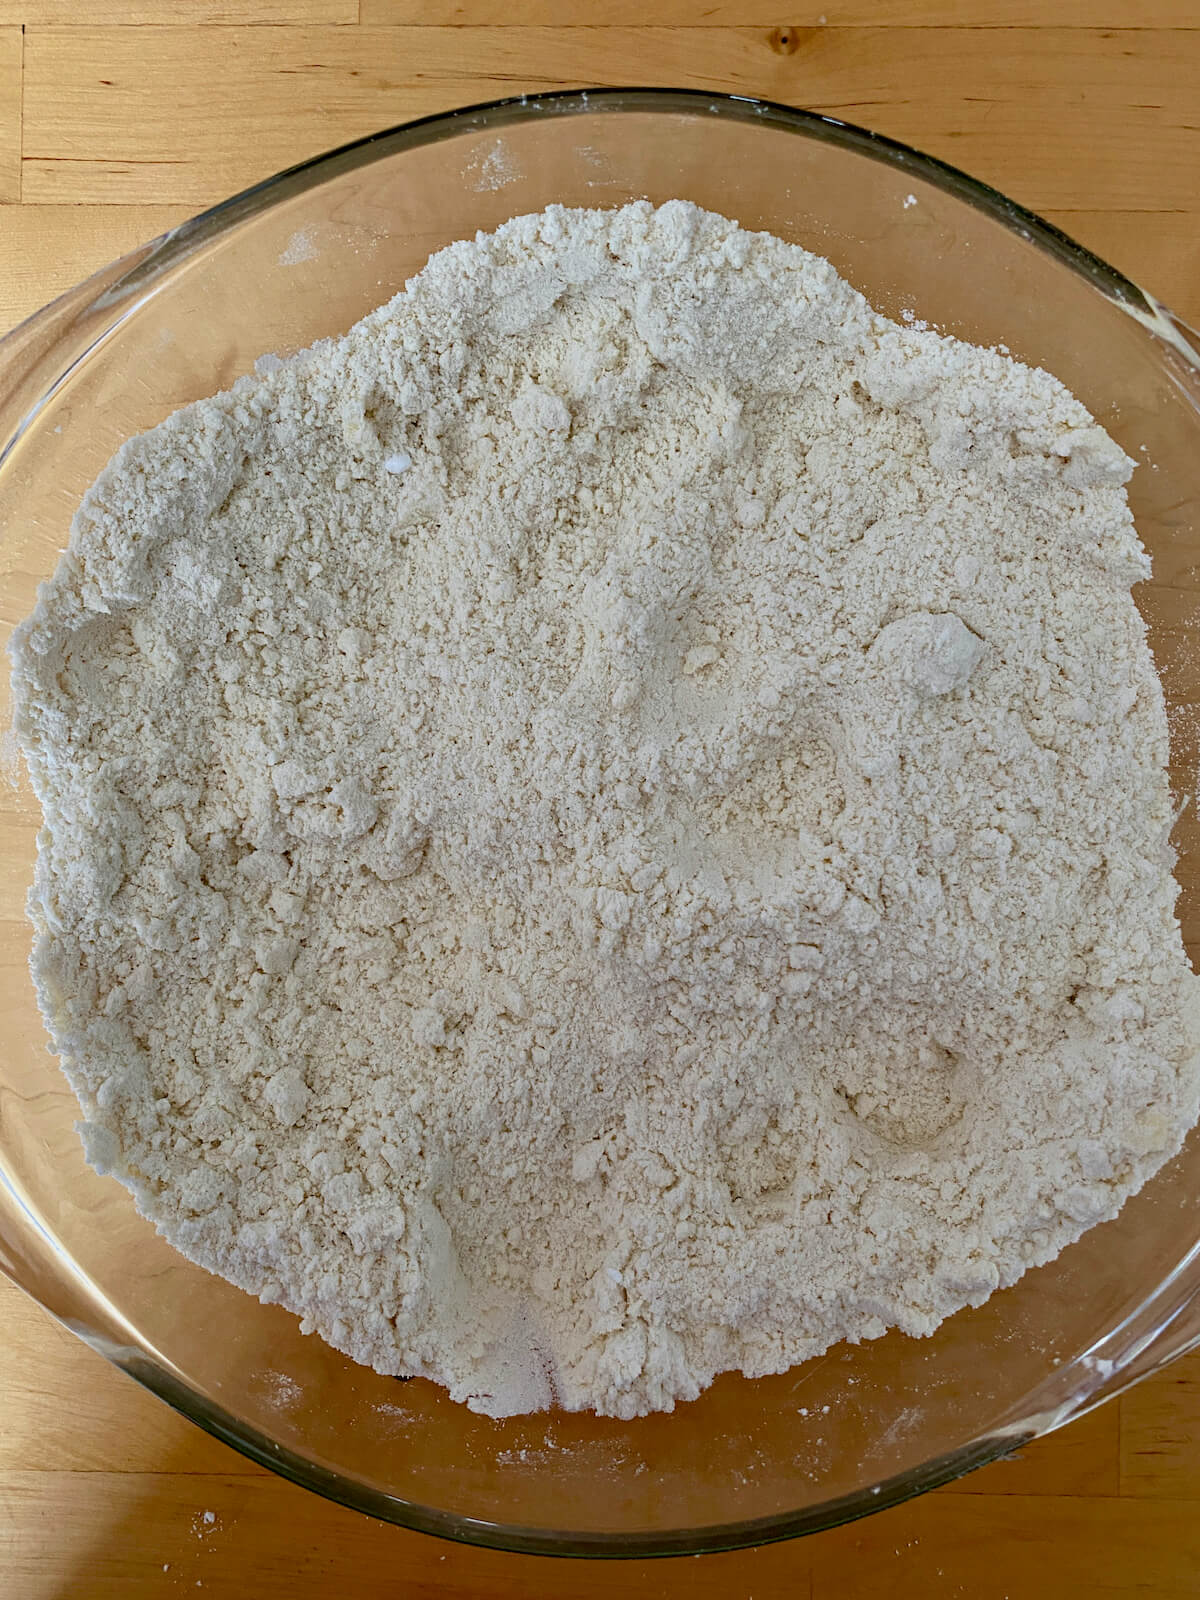 A crumbly mixture of flour, salt, baking soda, sugar, and butter.